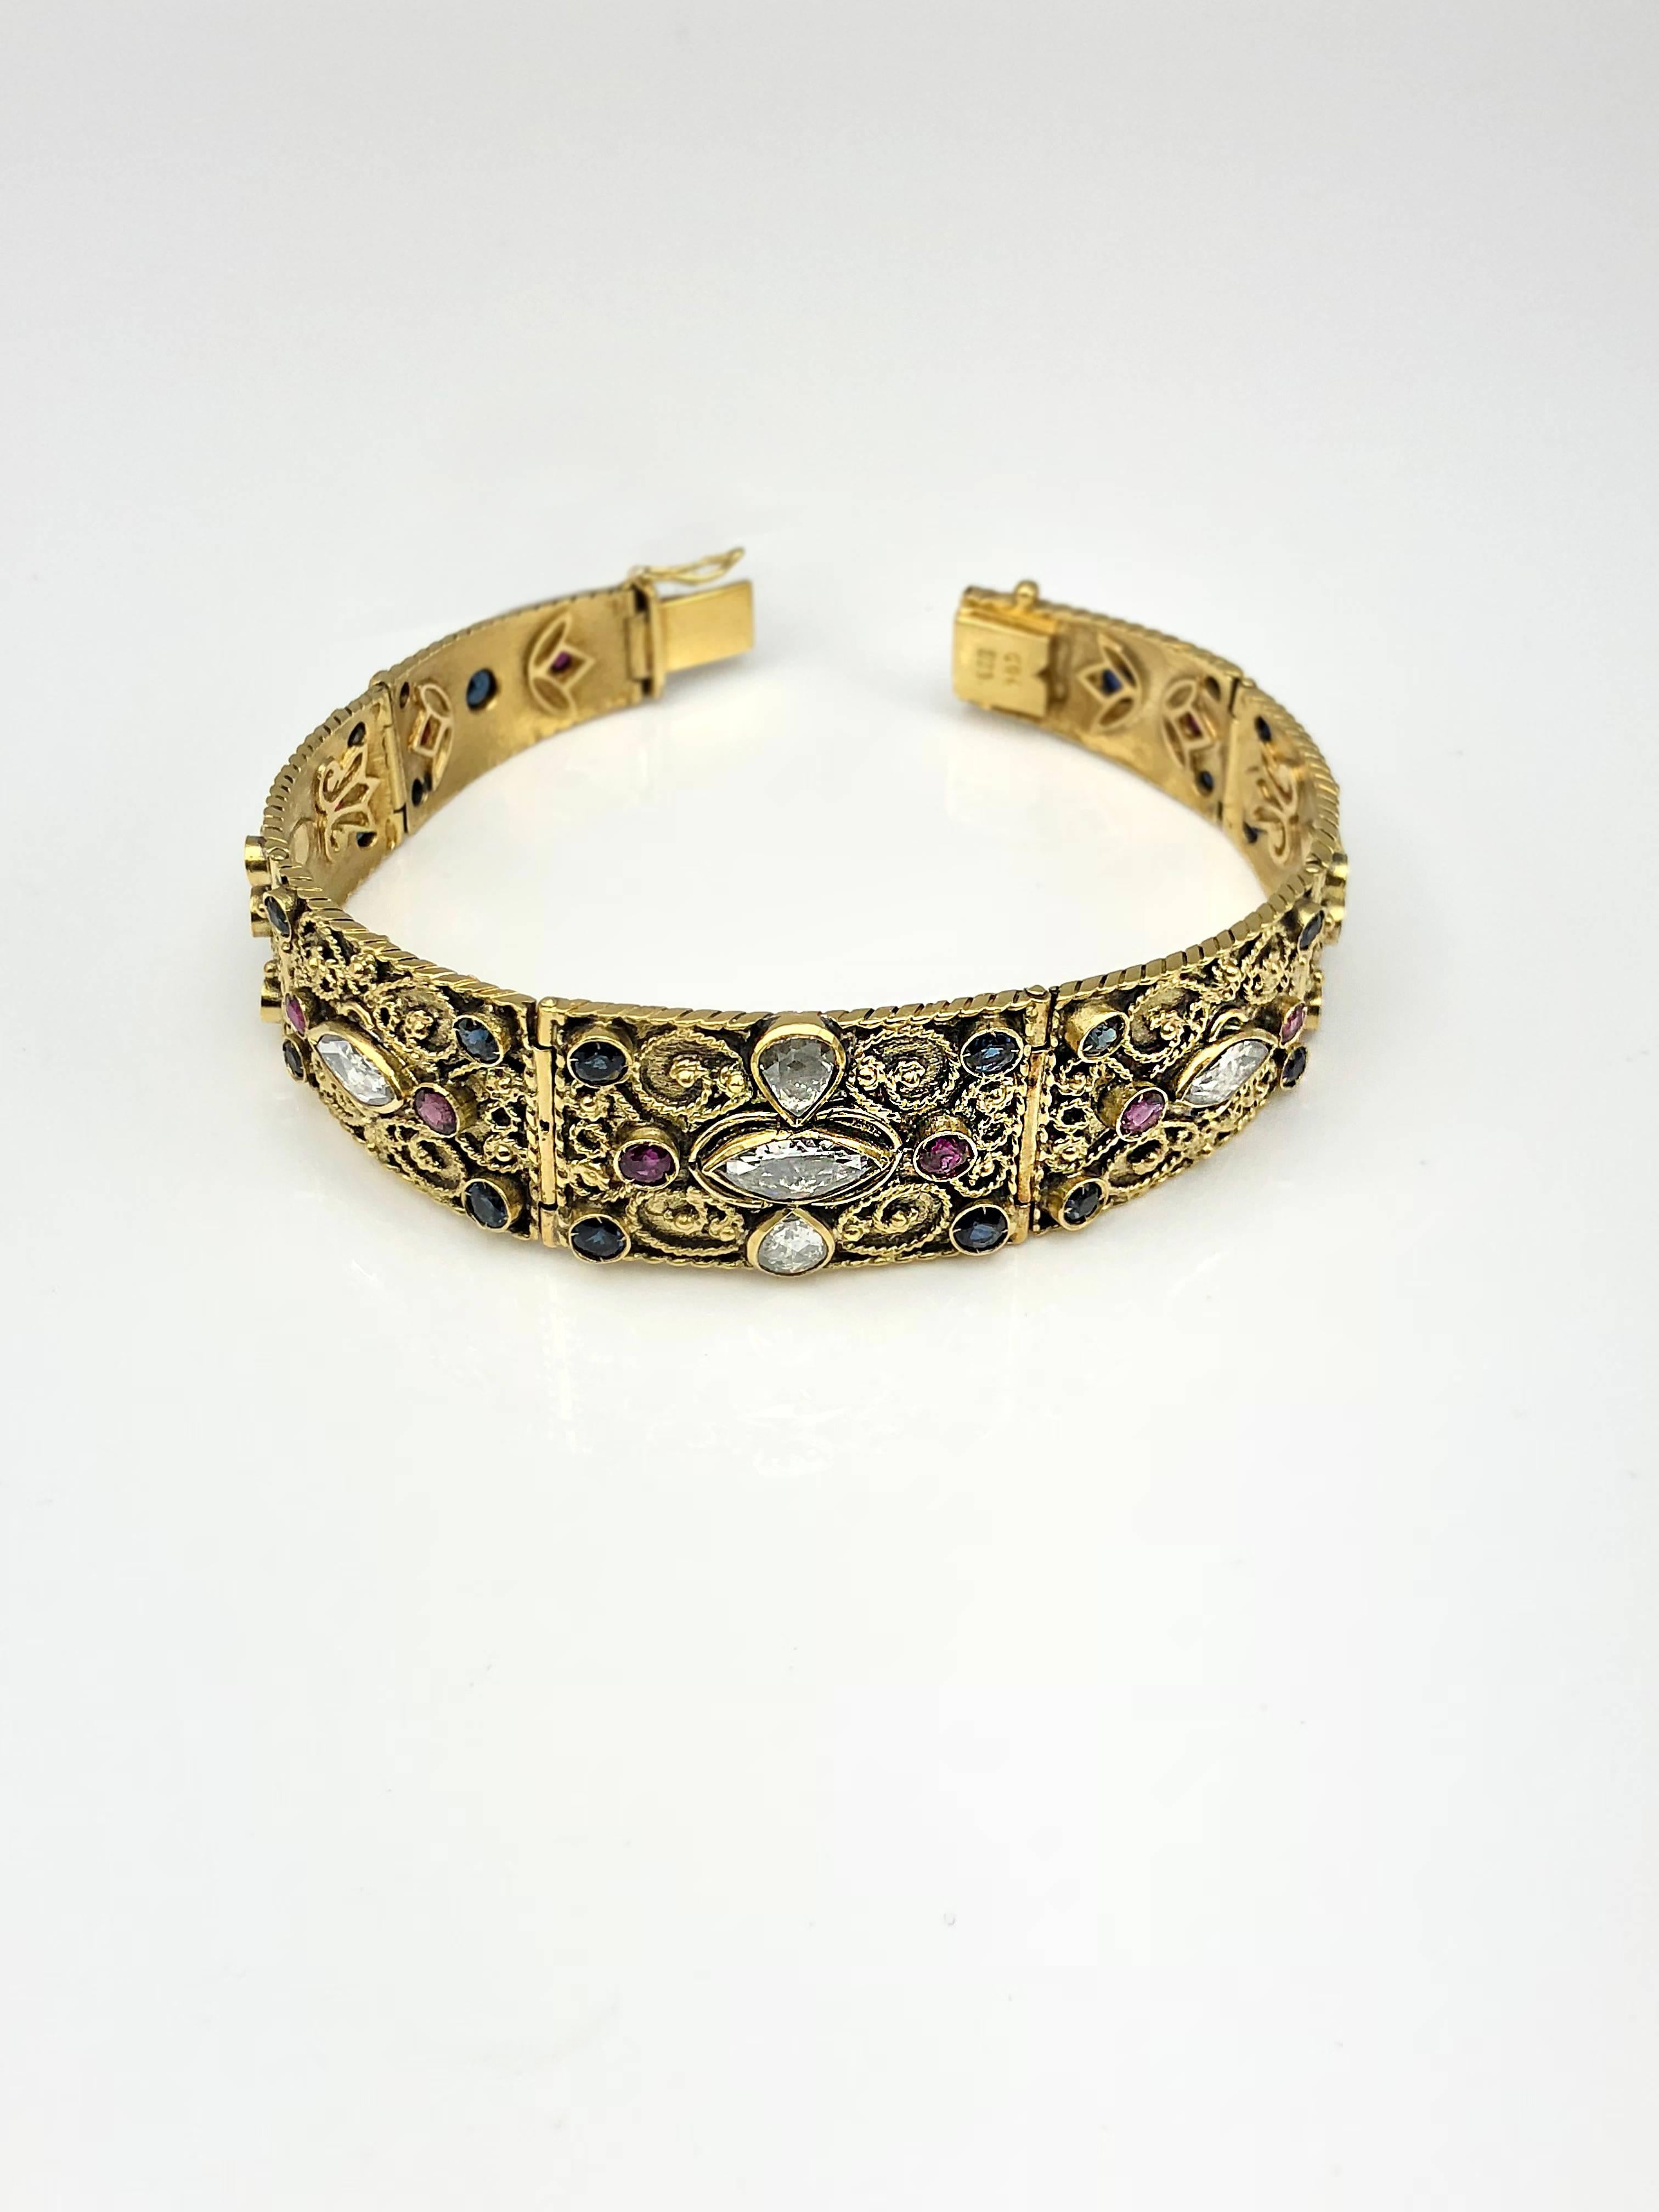 S.Georgios designer 18 Karat Yellow Gold Diamond Bracelet decorated in Byzantine Style with granulation work is all custom-made. The unique bracelet thanks to its design fits nicely on the wrist. This jewel features 3.00 Carat of Diamonds in Pear